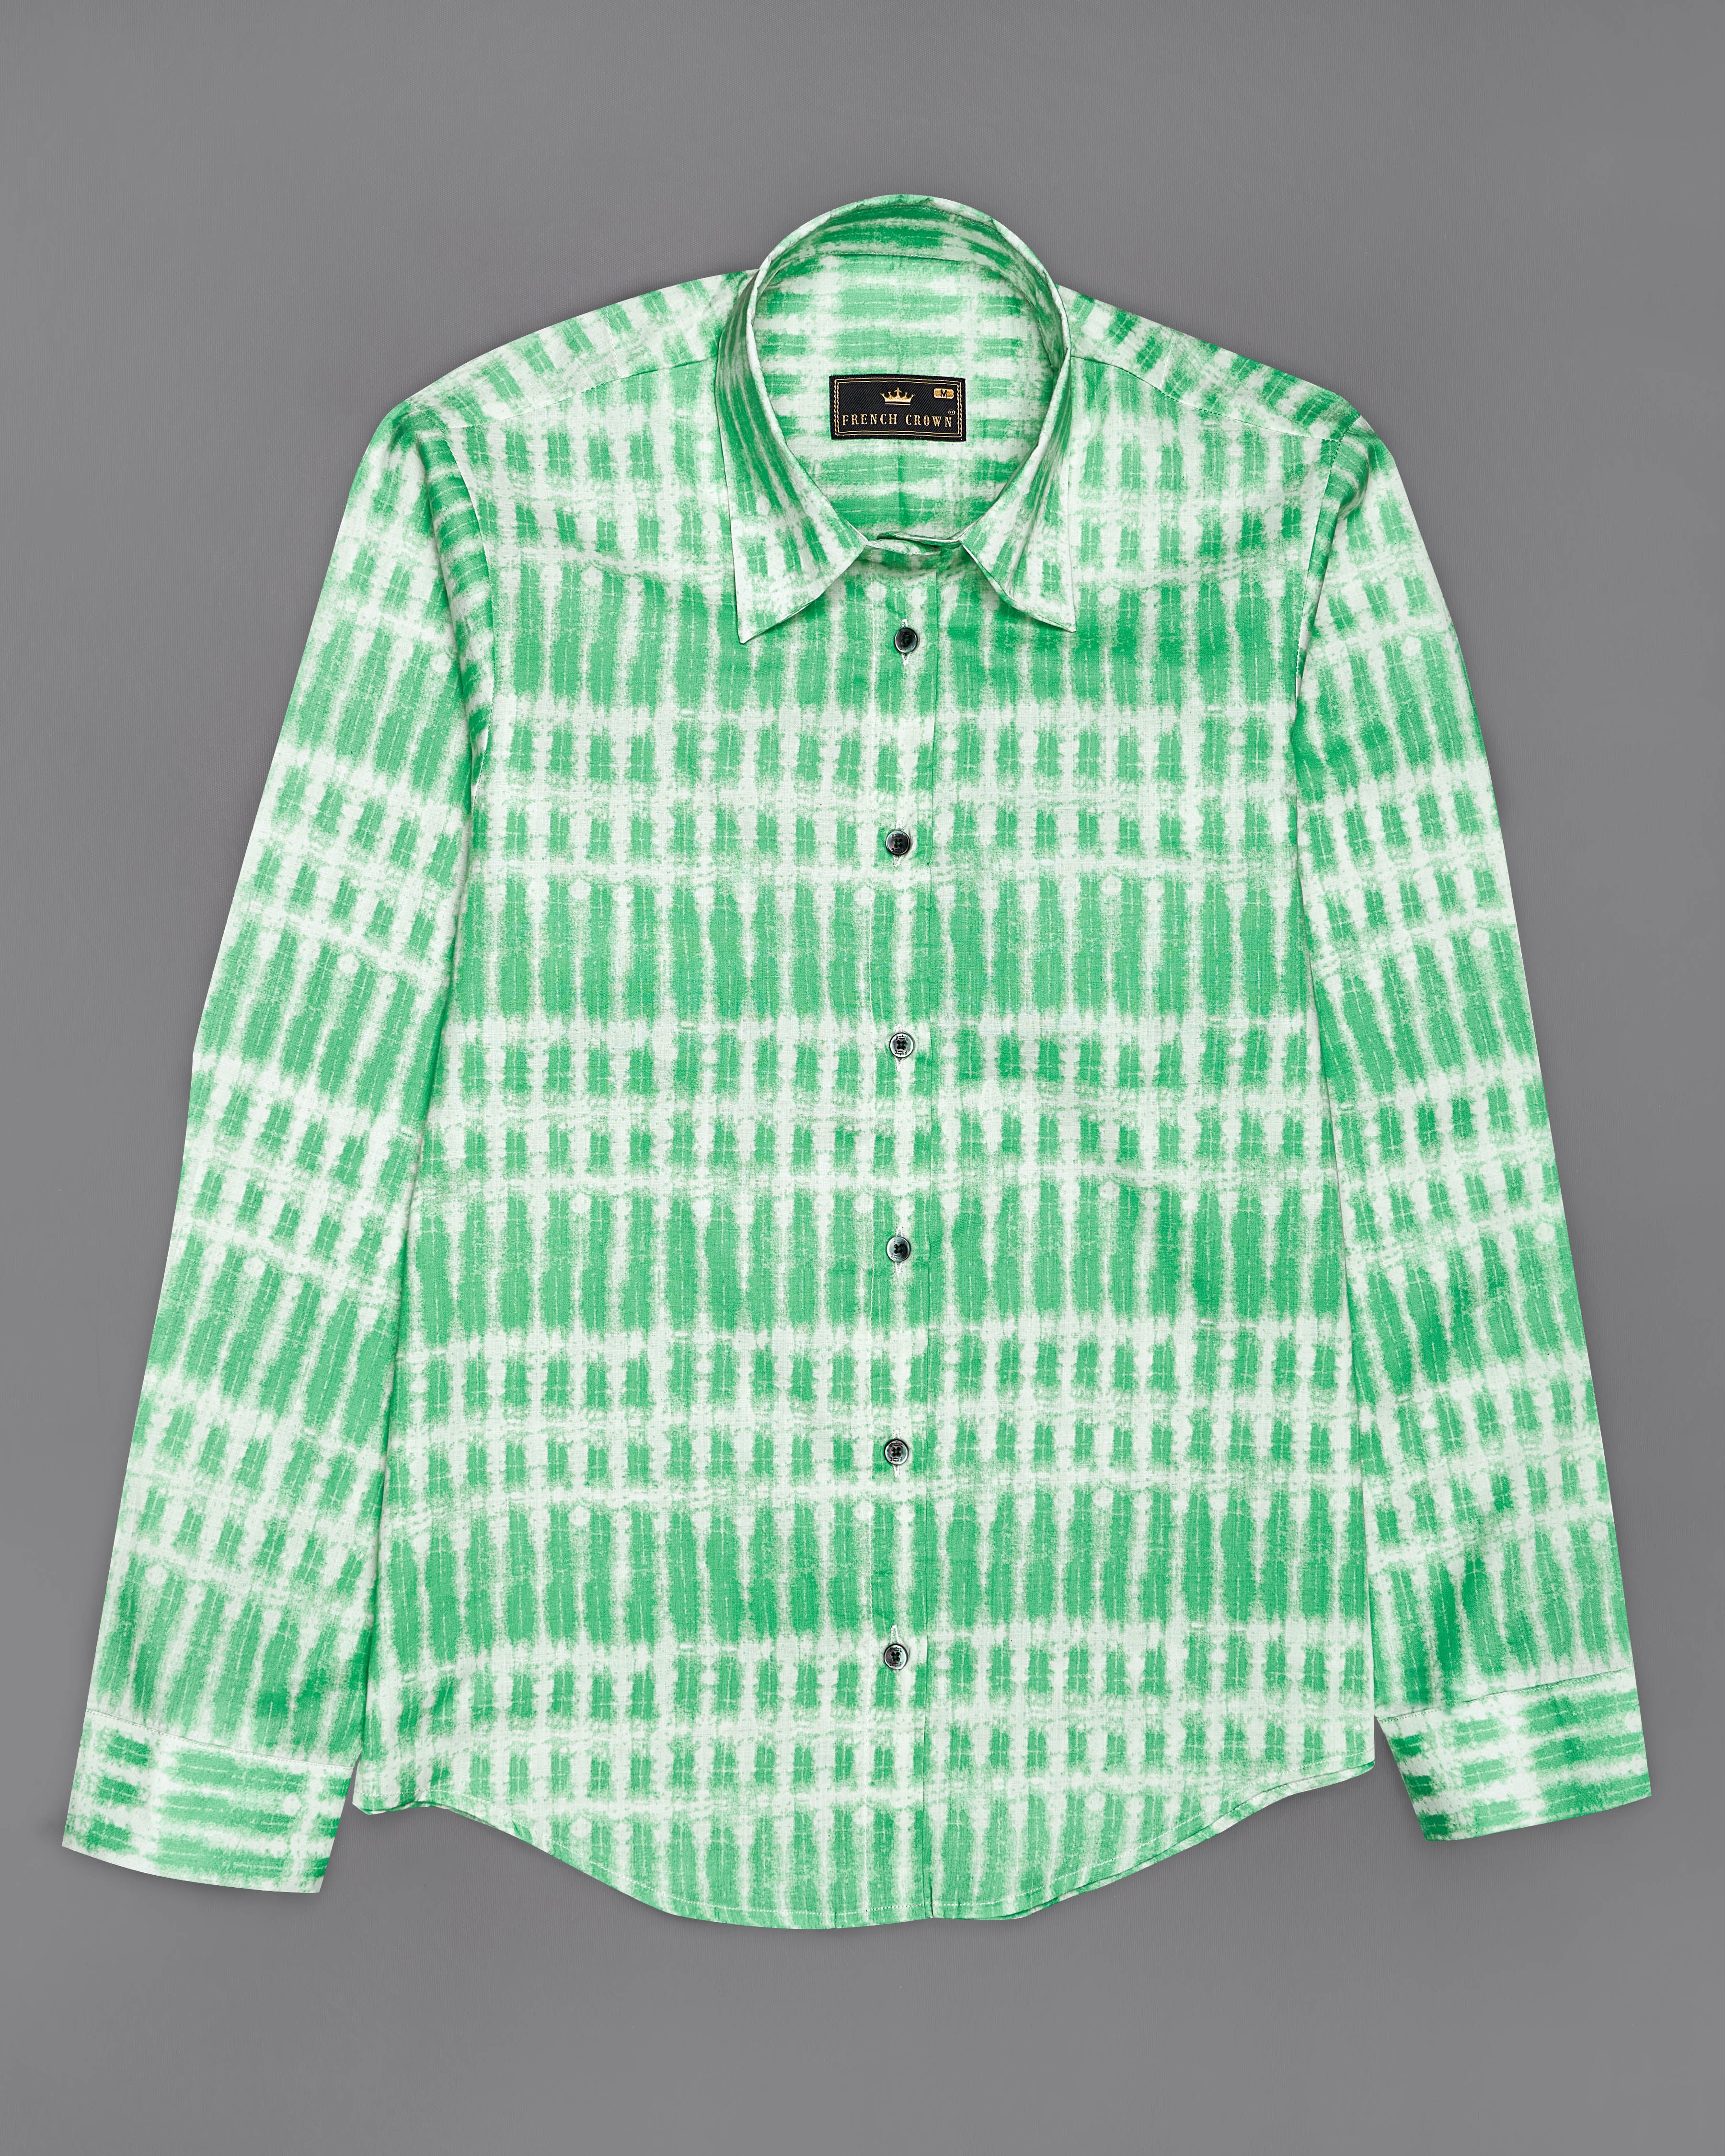 Teal Green with Bright White Printed Premium Tencel Shirt WS027-BLK-32, WS027-BLK-34, WS027-BLK-36, WS027-BLK-38, WS027-BLK-40, WS027-BLK-42